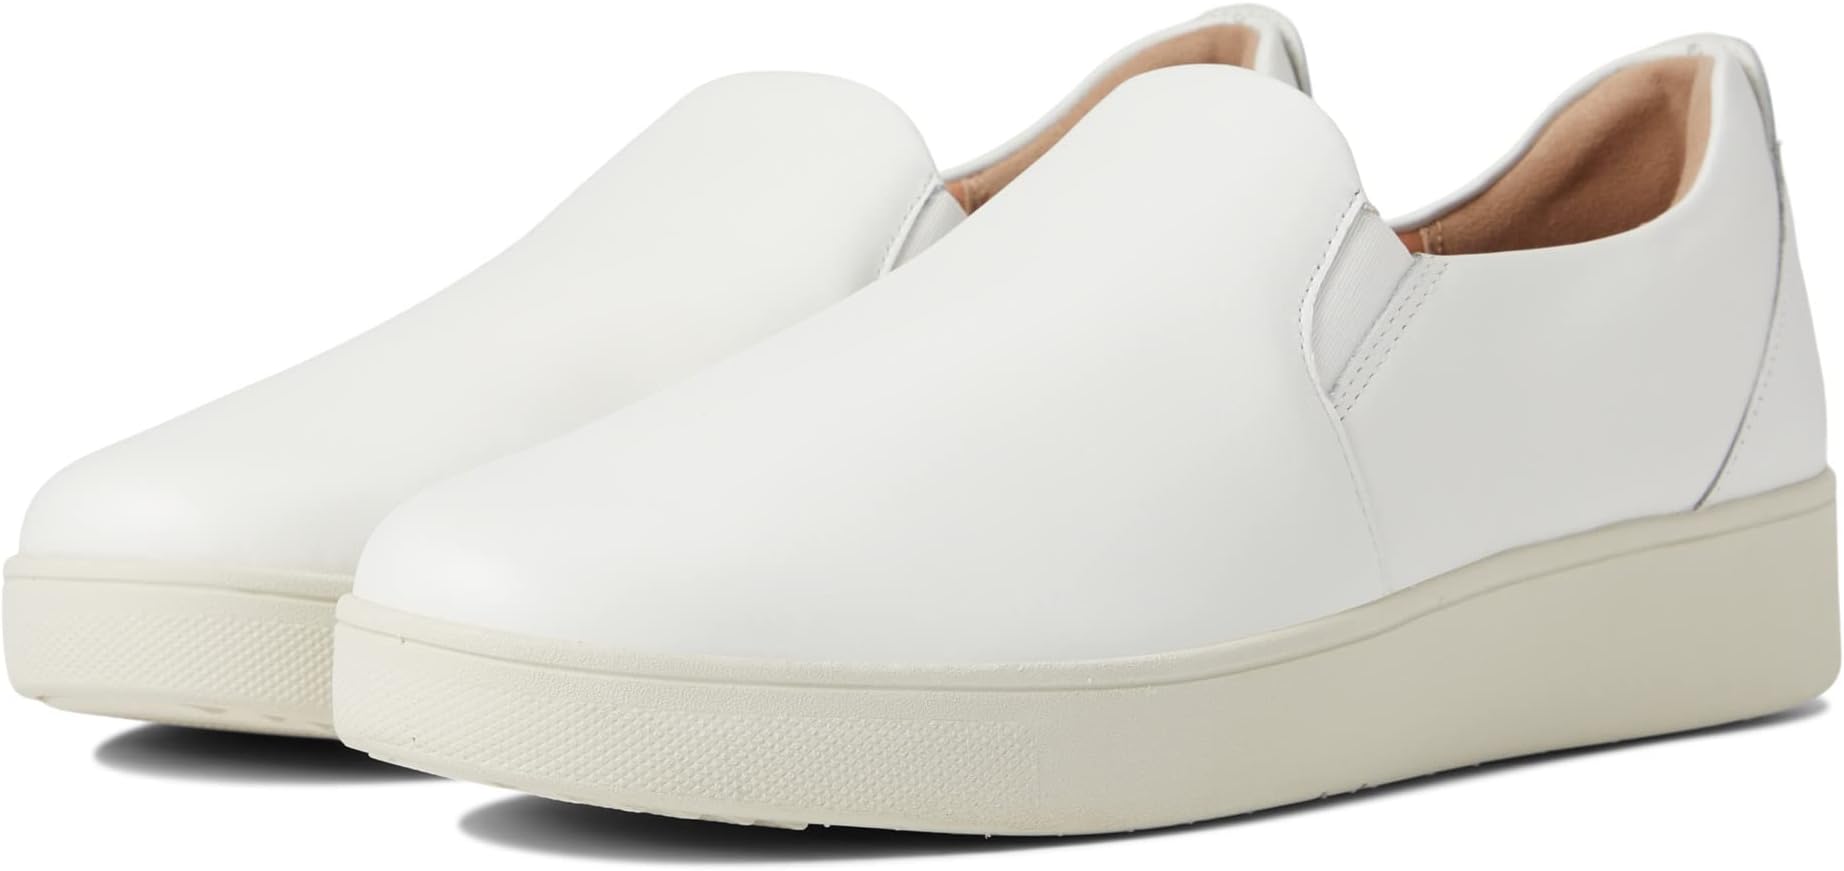 Кроссовки Rally Leather Slip-On Skate Sneakers FitFlop, цвет Urban White кроссовки fitflop rally leather high top sneakers